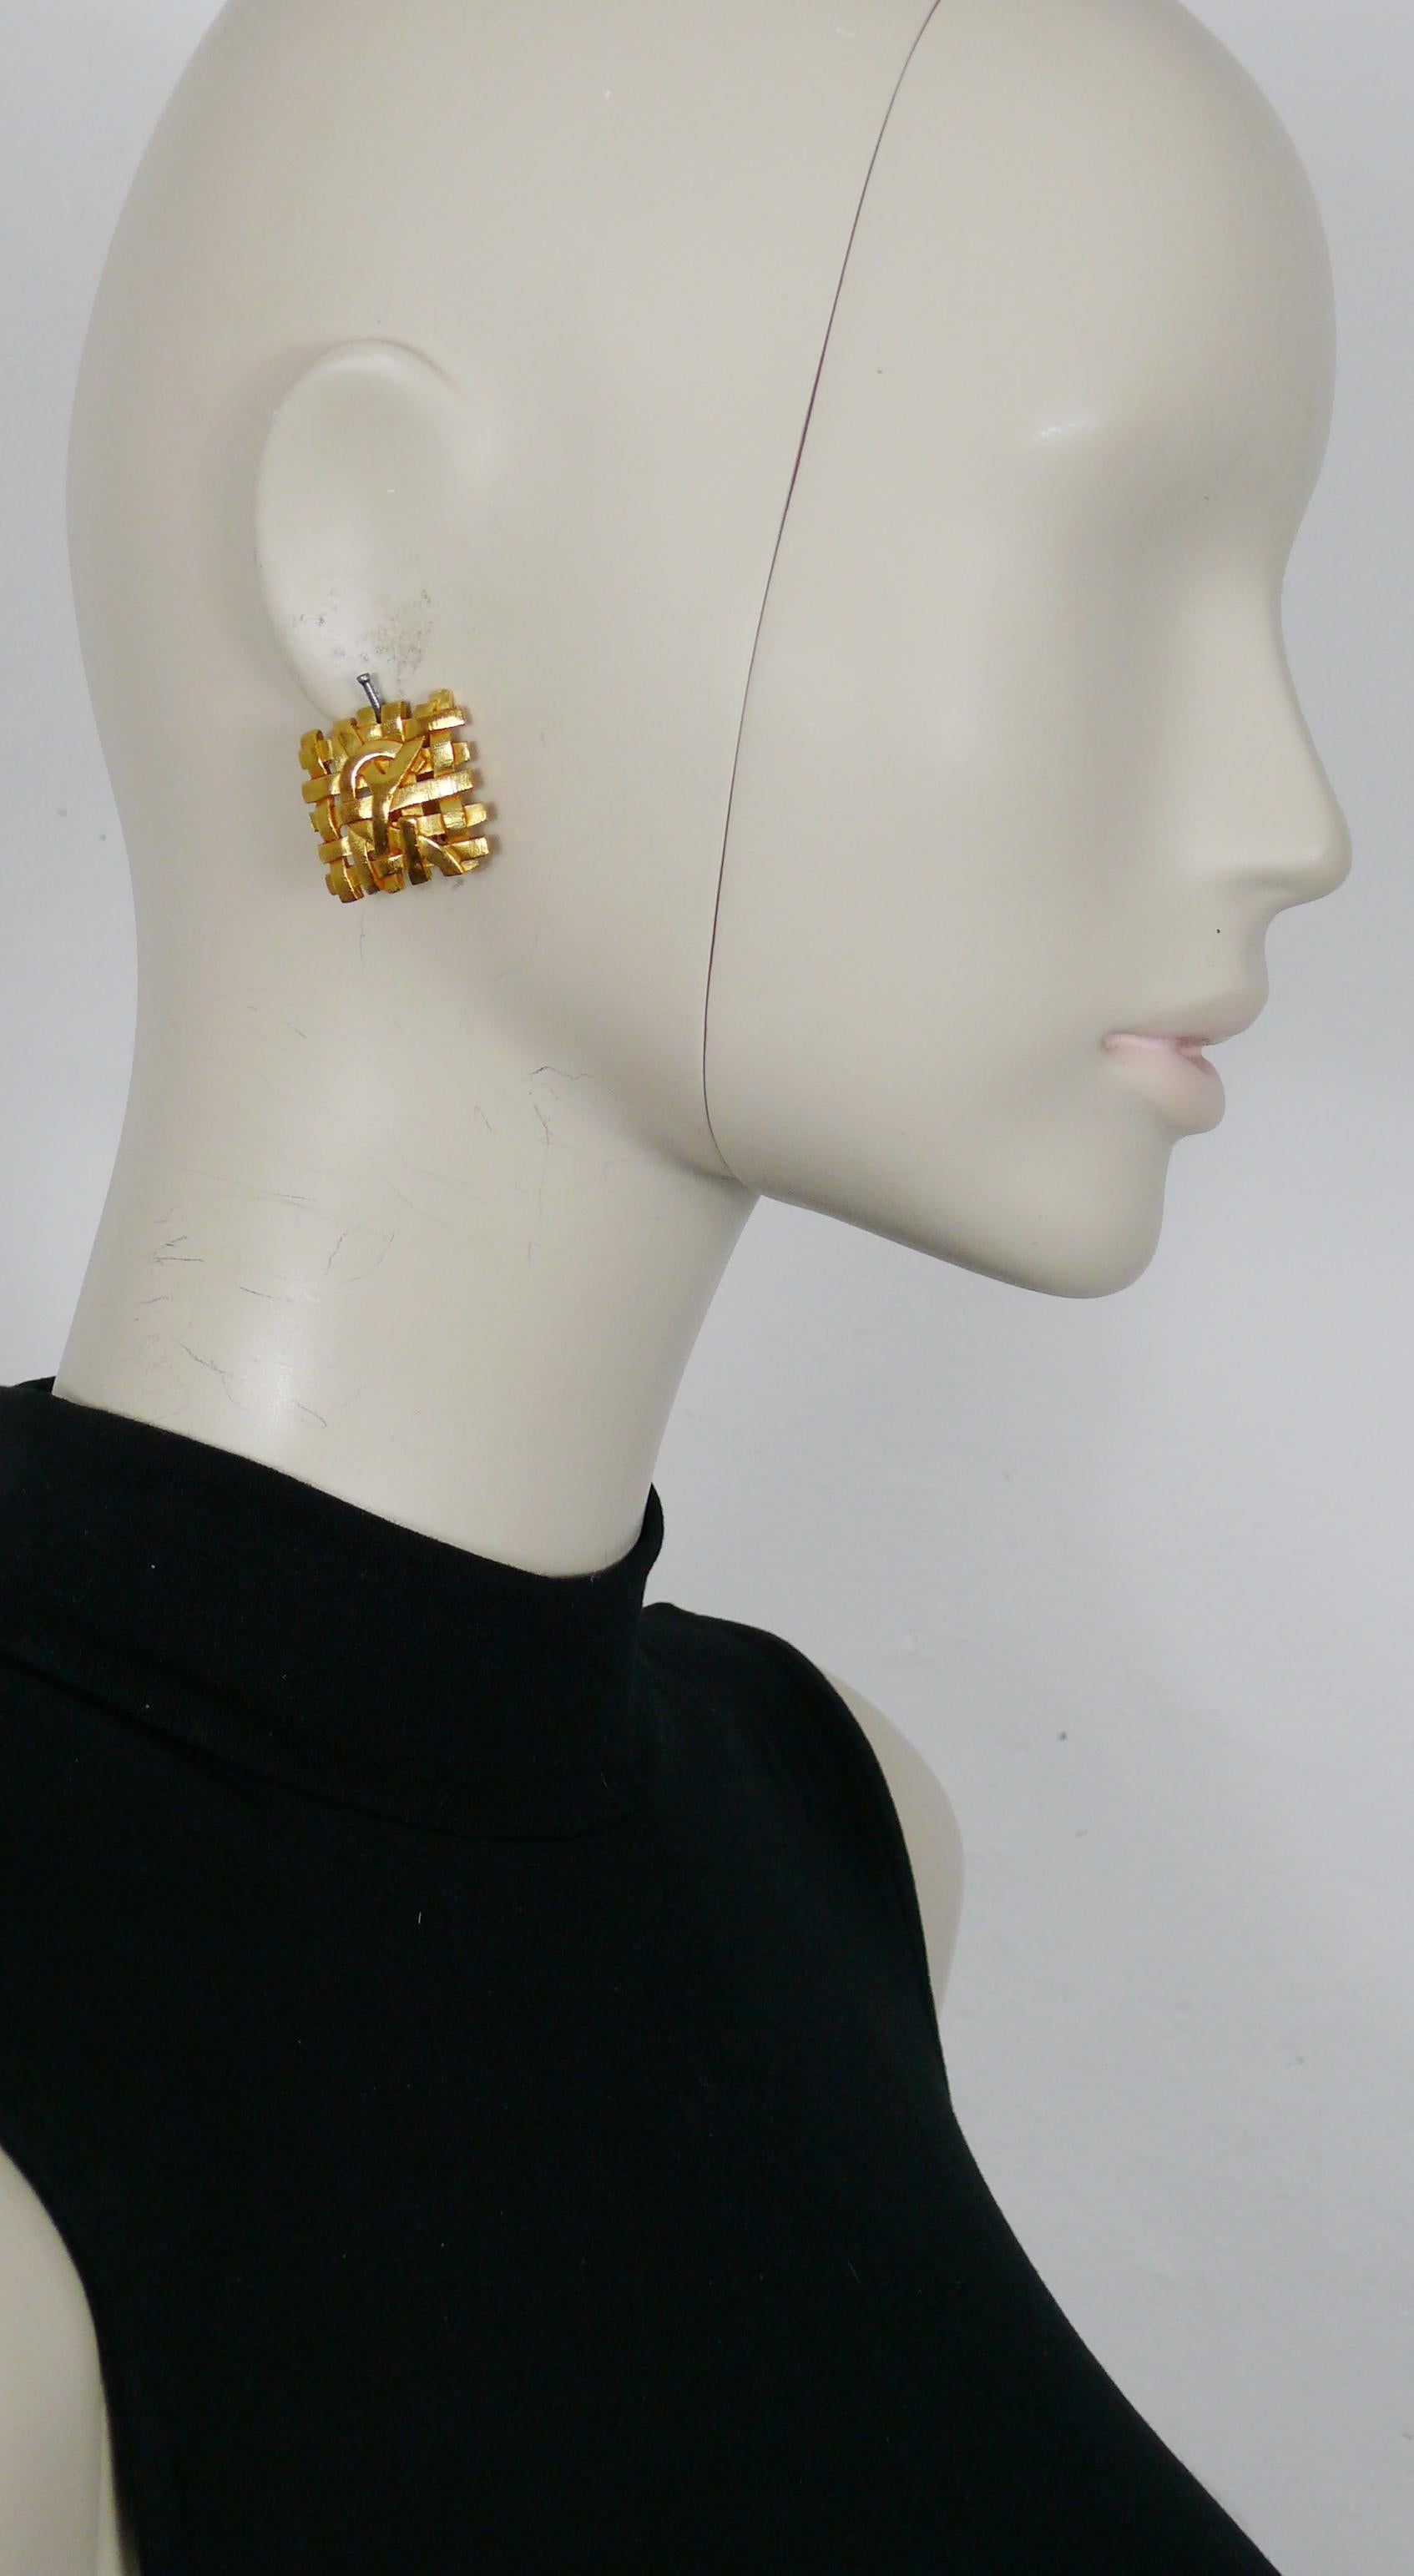 YVES SAINT LAURENT vintage gold toned openwork woven clip-on earrings featuring a YSL monogram.

Embossed YSL Made in France.

Indicative measurements : approx. 2.5 cm x 2.5 cm (0.98 inch x 0.98 inch).

Comes with the original YVES SAINT LAURENT